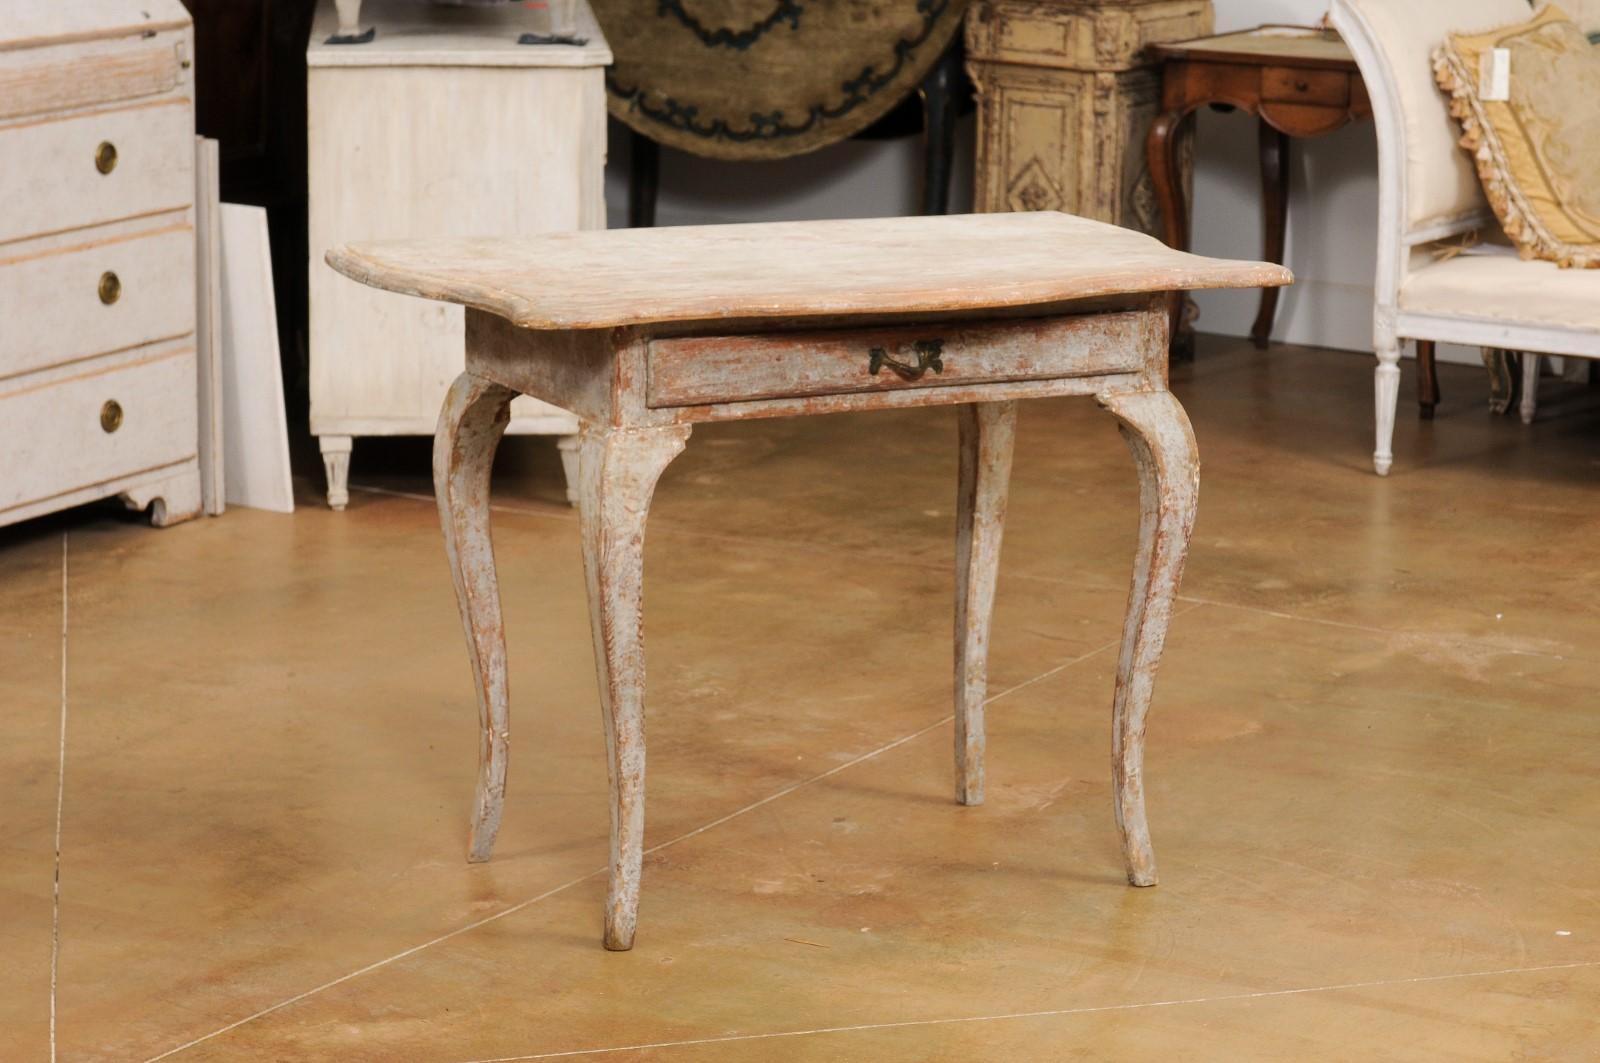 Carved Swedish Rococo 1780s Painted Table with Serpentine Front and Distressed Finish